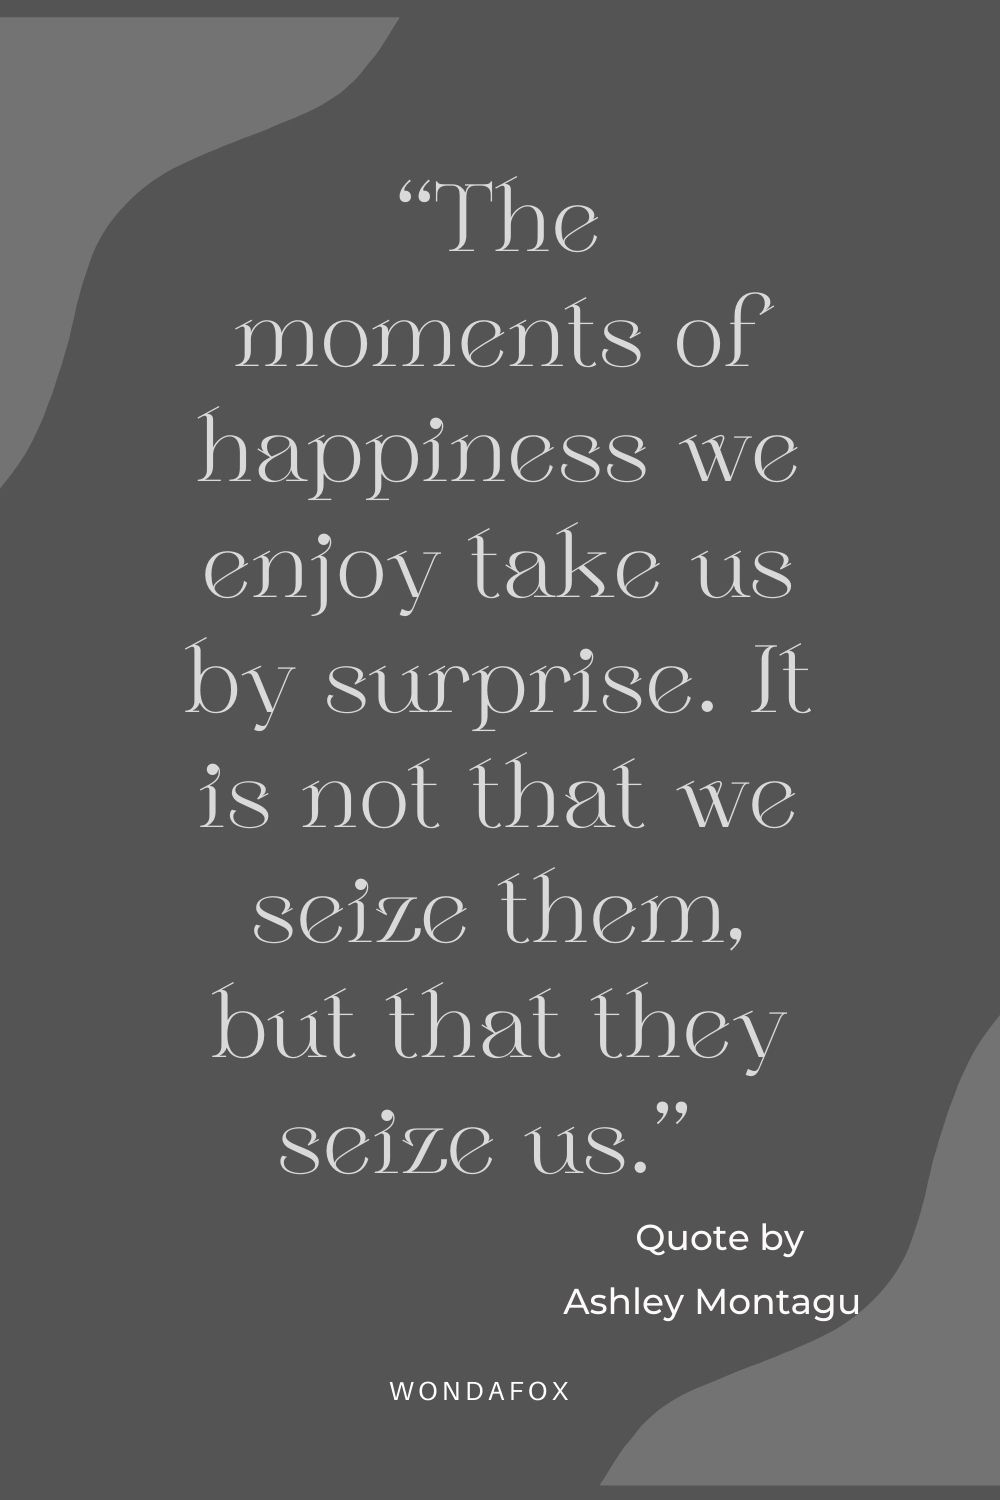 “The moments of happiness we enjoy take us by surprise. It is not that we seize them, but that they seize us.” 
Ashley Montagu
